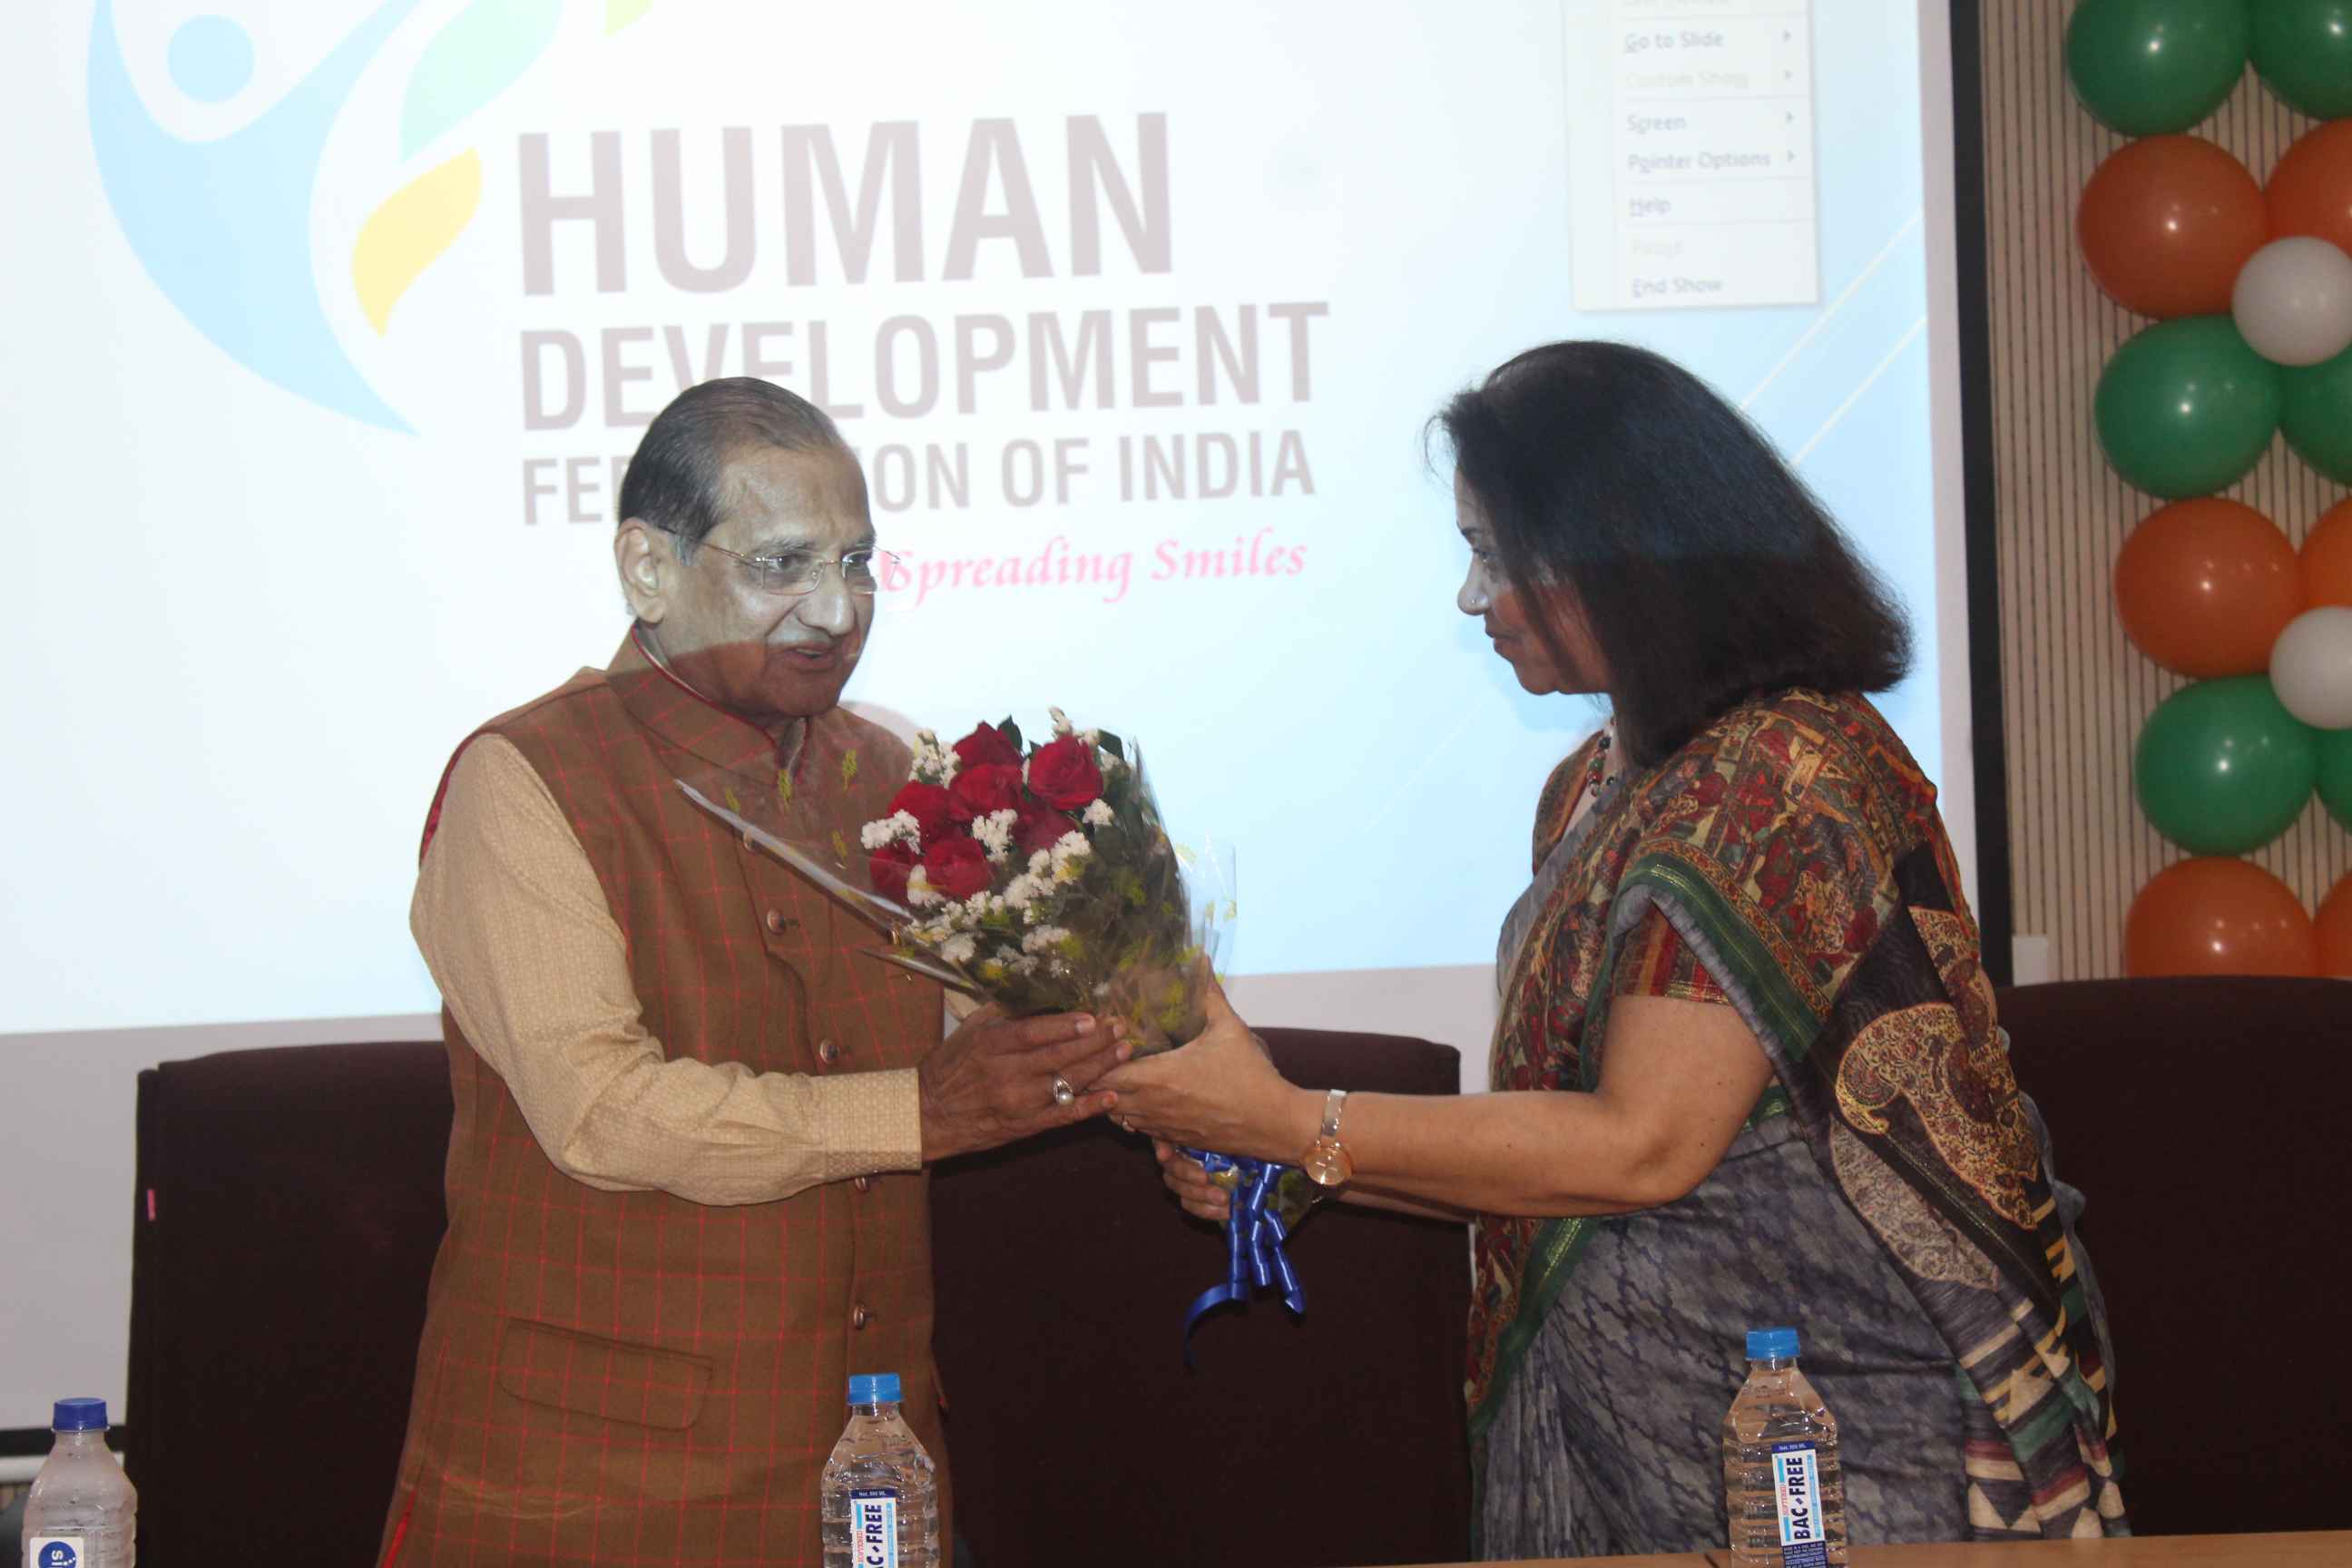 Human Development and Federation Of India